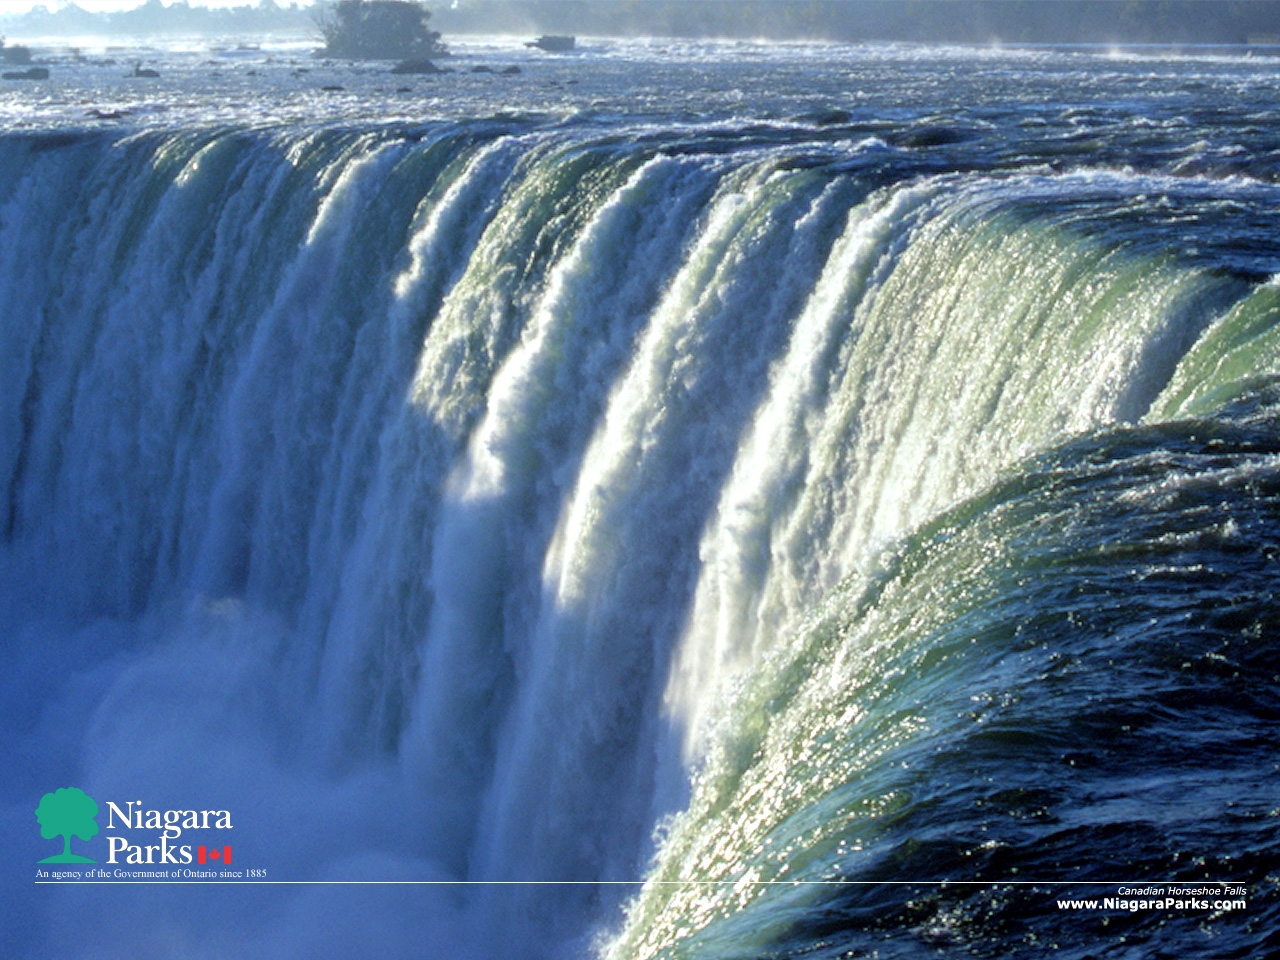  our wallpaper of the month Niagara Falls Landscapes wallpapers